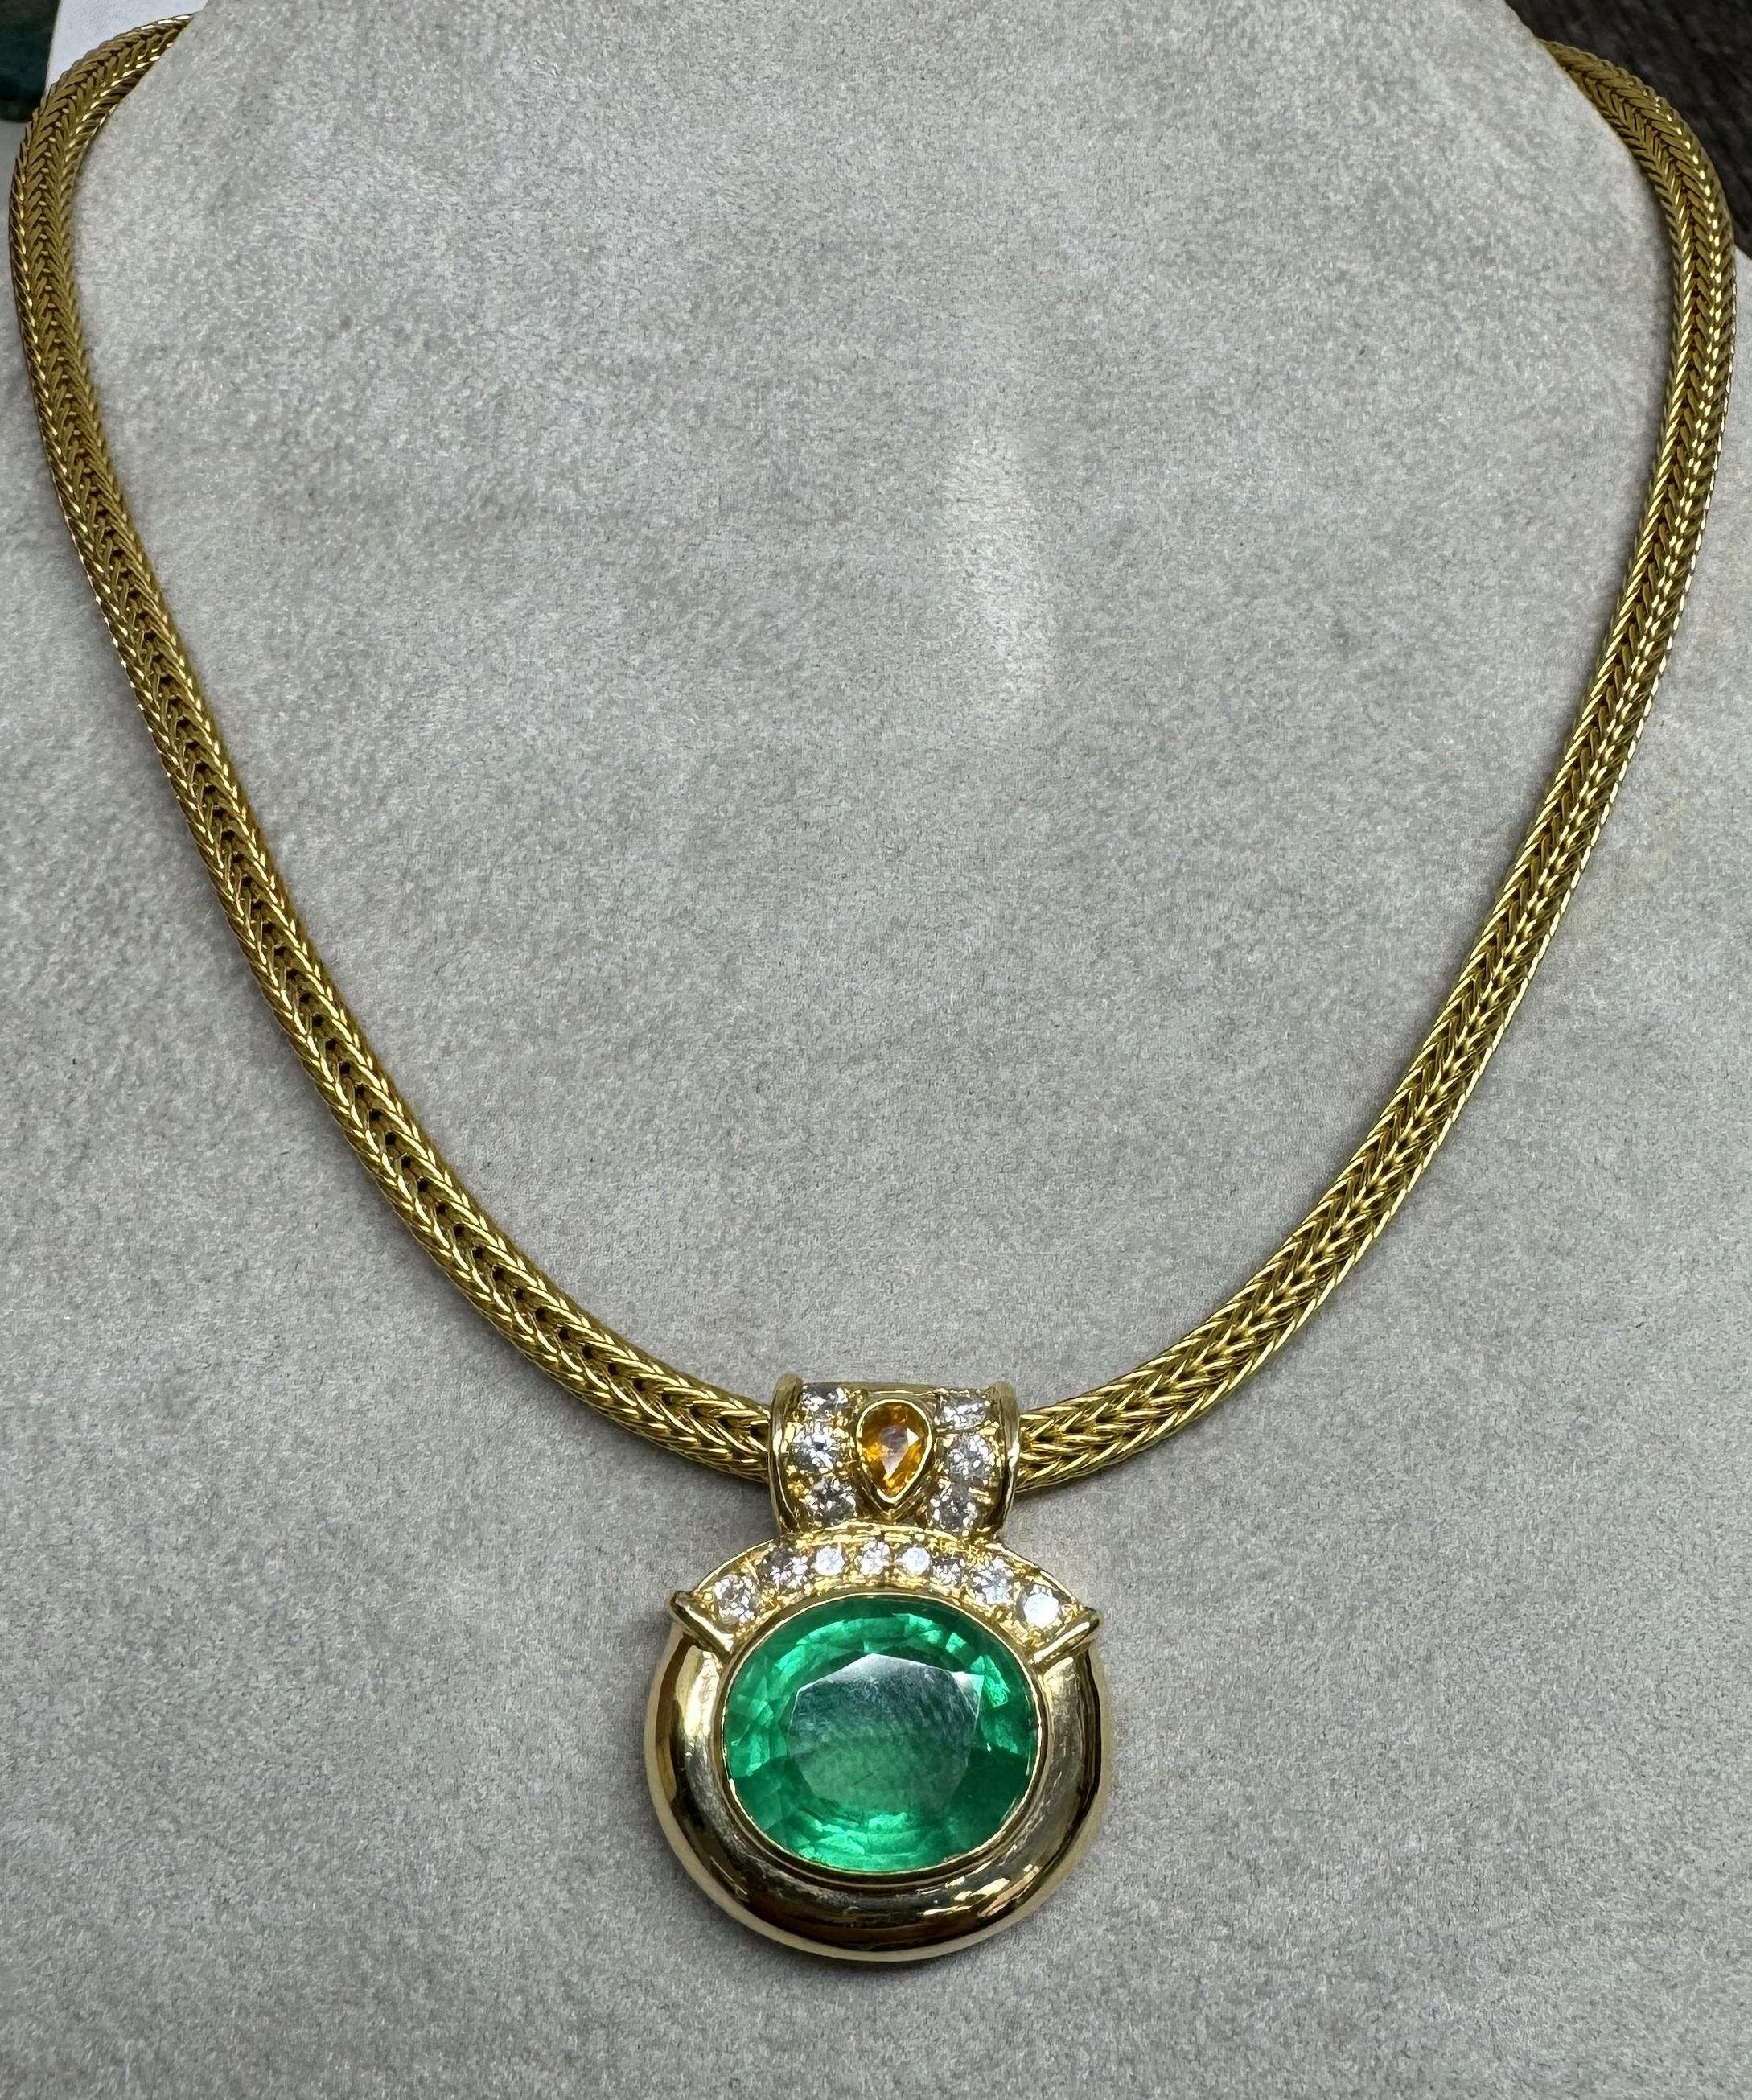 GIA Certified 18.80cts. Oval Emerald and Diamond Pendant set in 18k Yellow Gold
Specifications:
Metal: 18K yellow gold
Weight: 46.92 Gr
Main Stone: GIA Certified 18.80cts. (Estimated
                      weight) Oval Emerald 15.70 x 13.10 x